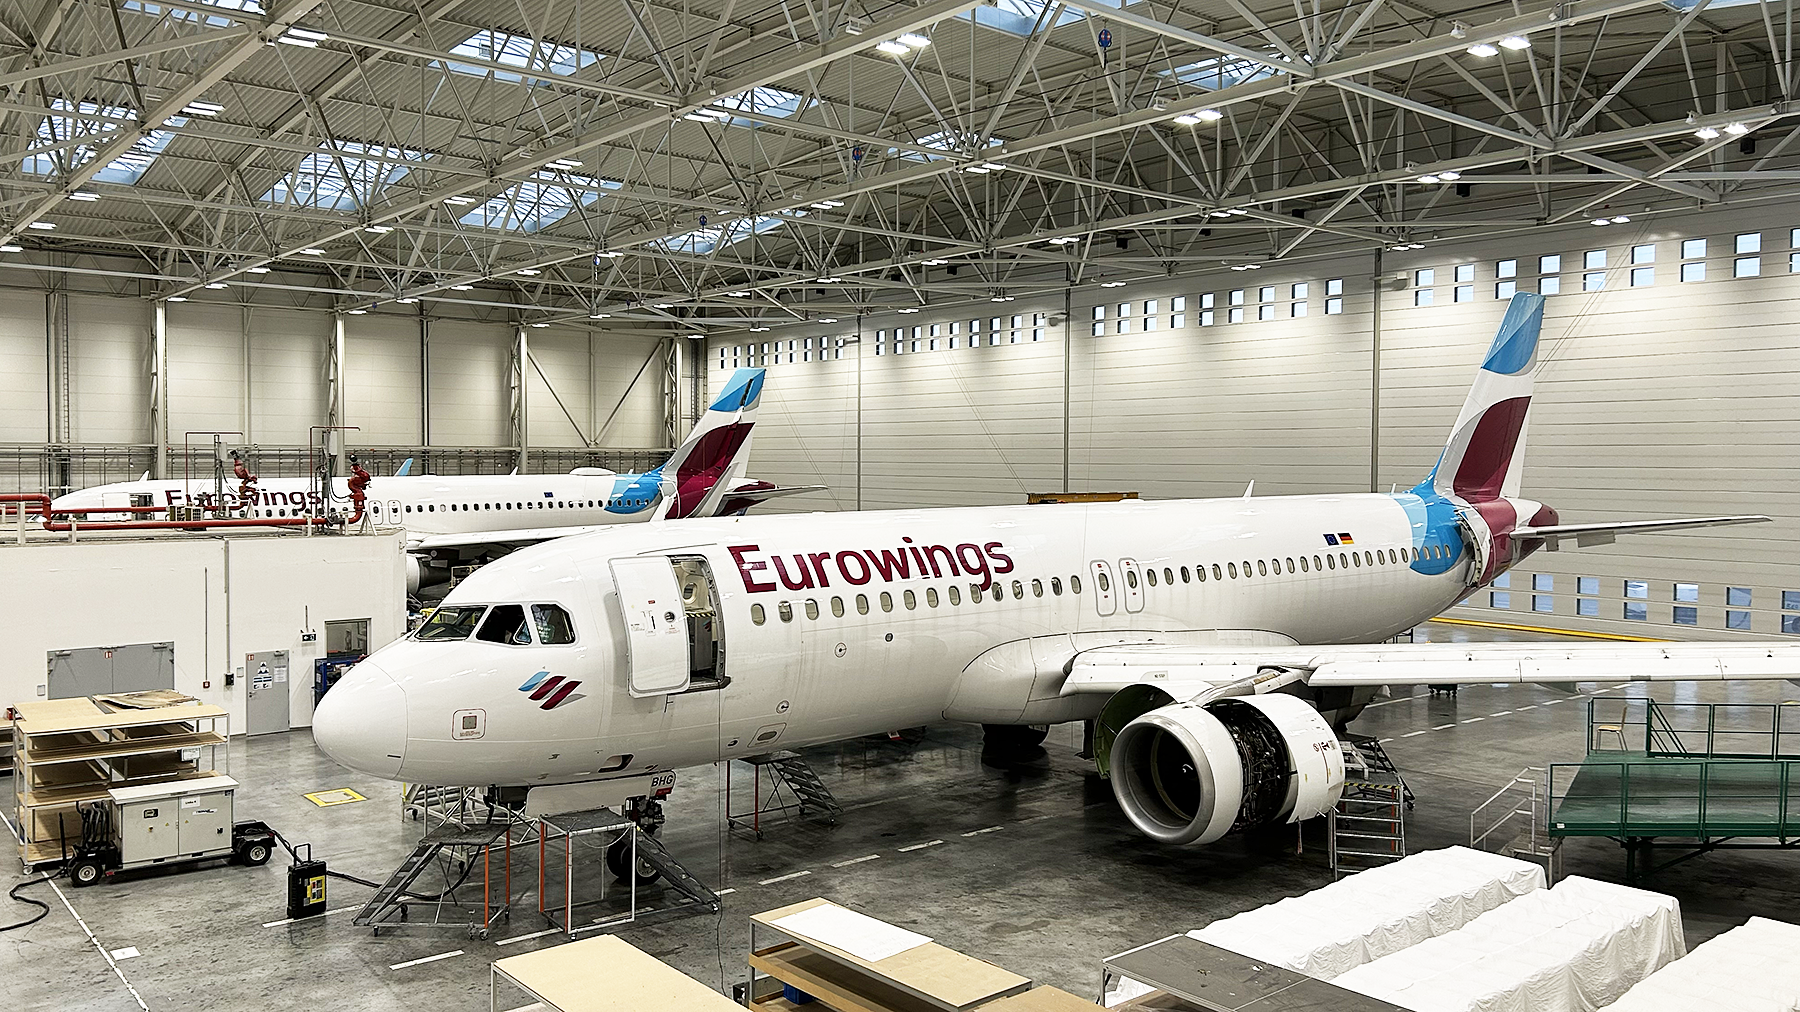 EUROWINGS INKS MAJOR MAINTENANCE DEAL WITH JOB AIR TECHNIC FOR TWO WINTER SEASONS